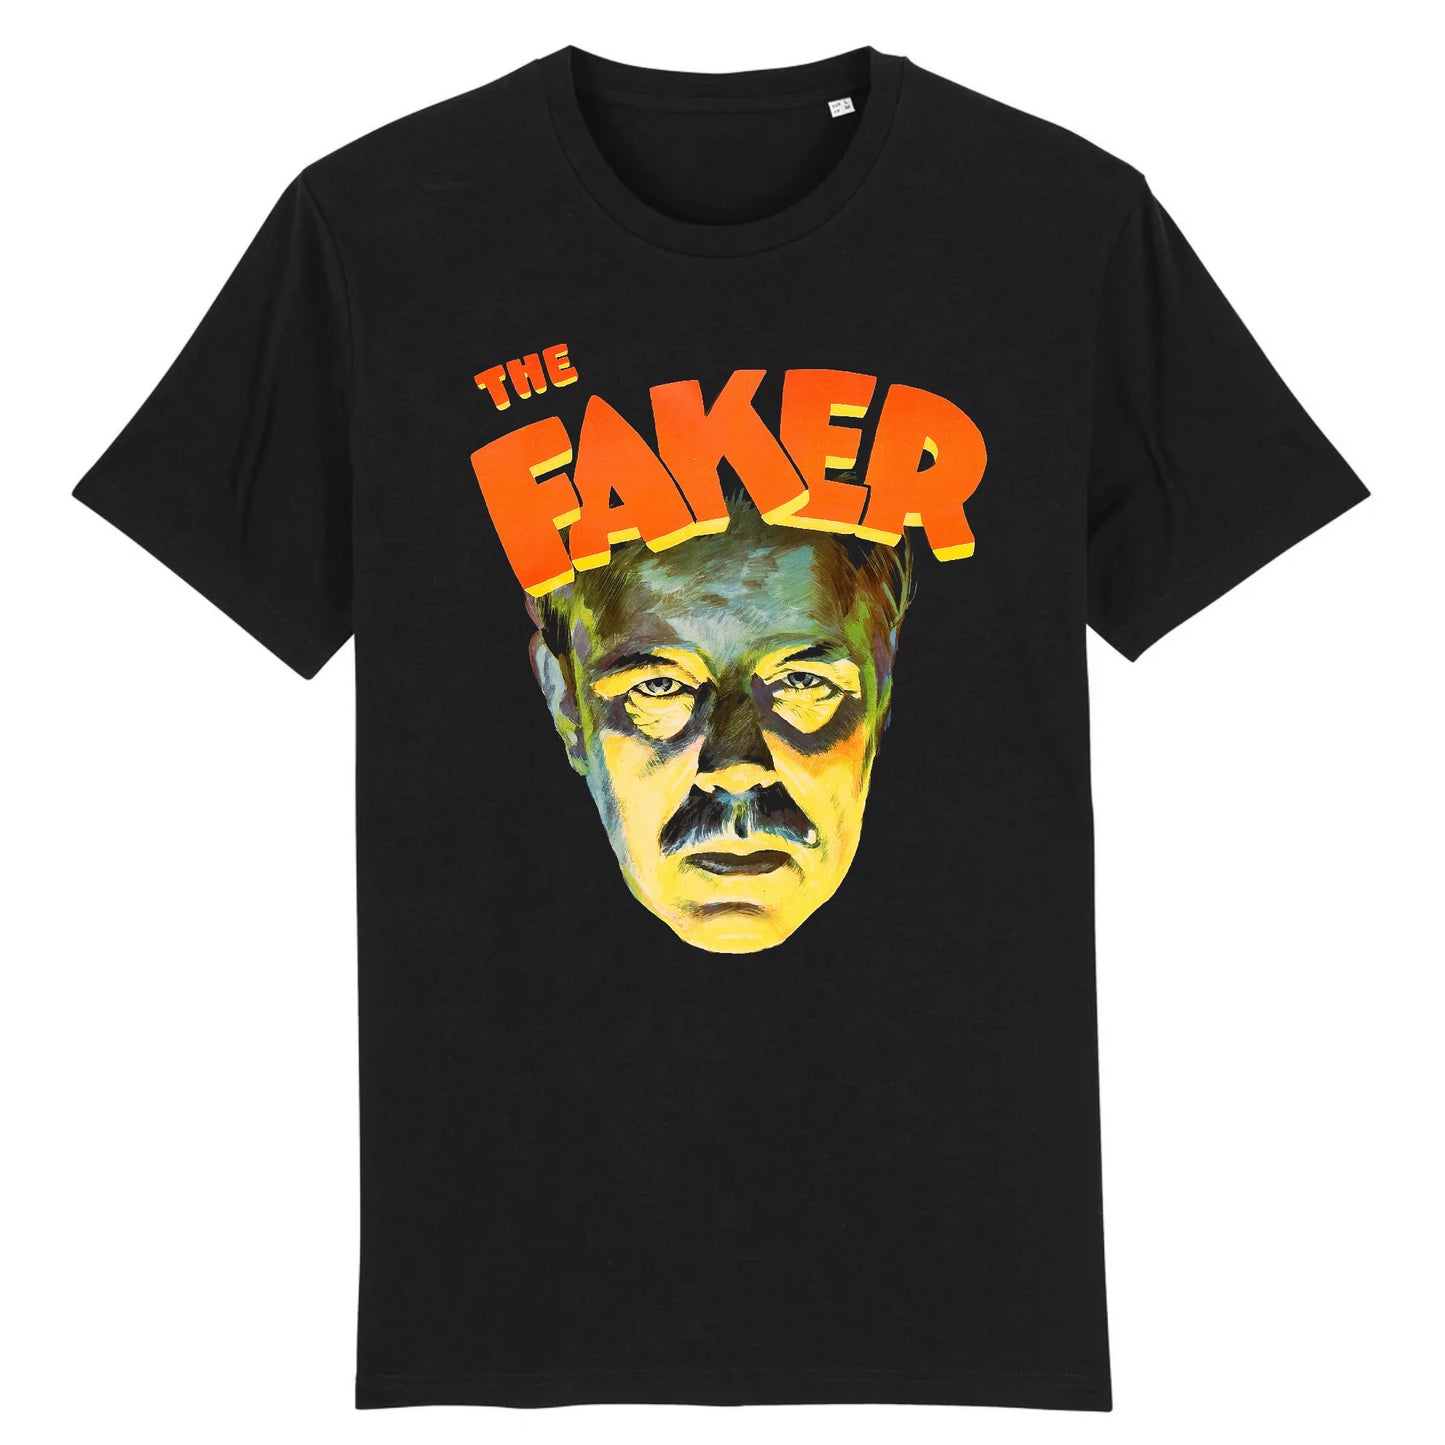 Based on the poster for THE FAKER, 1929 - Organic Cotton T-Shirts